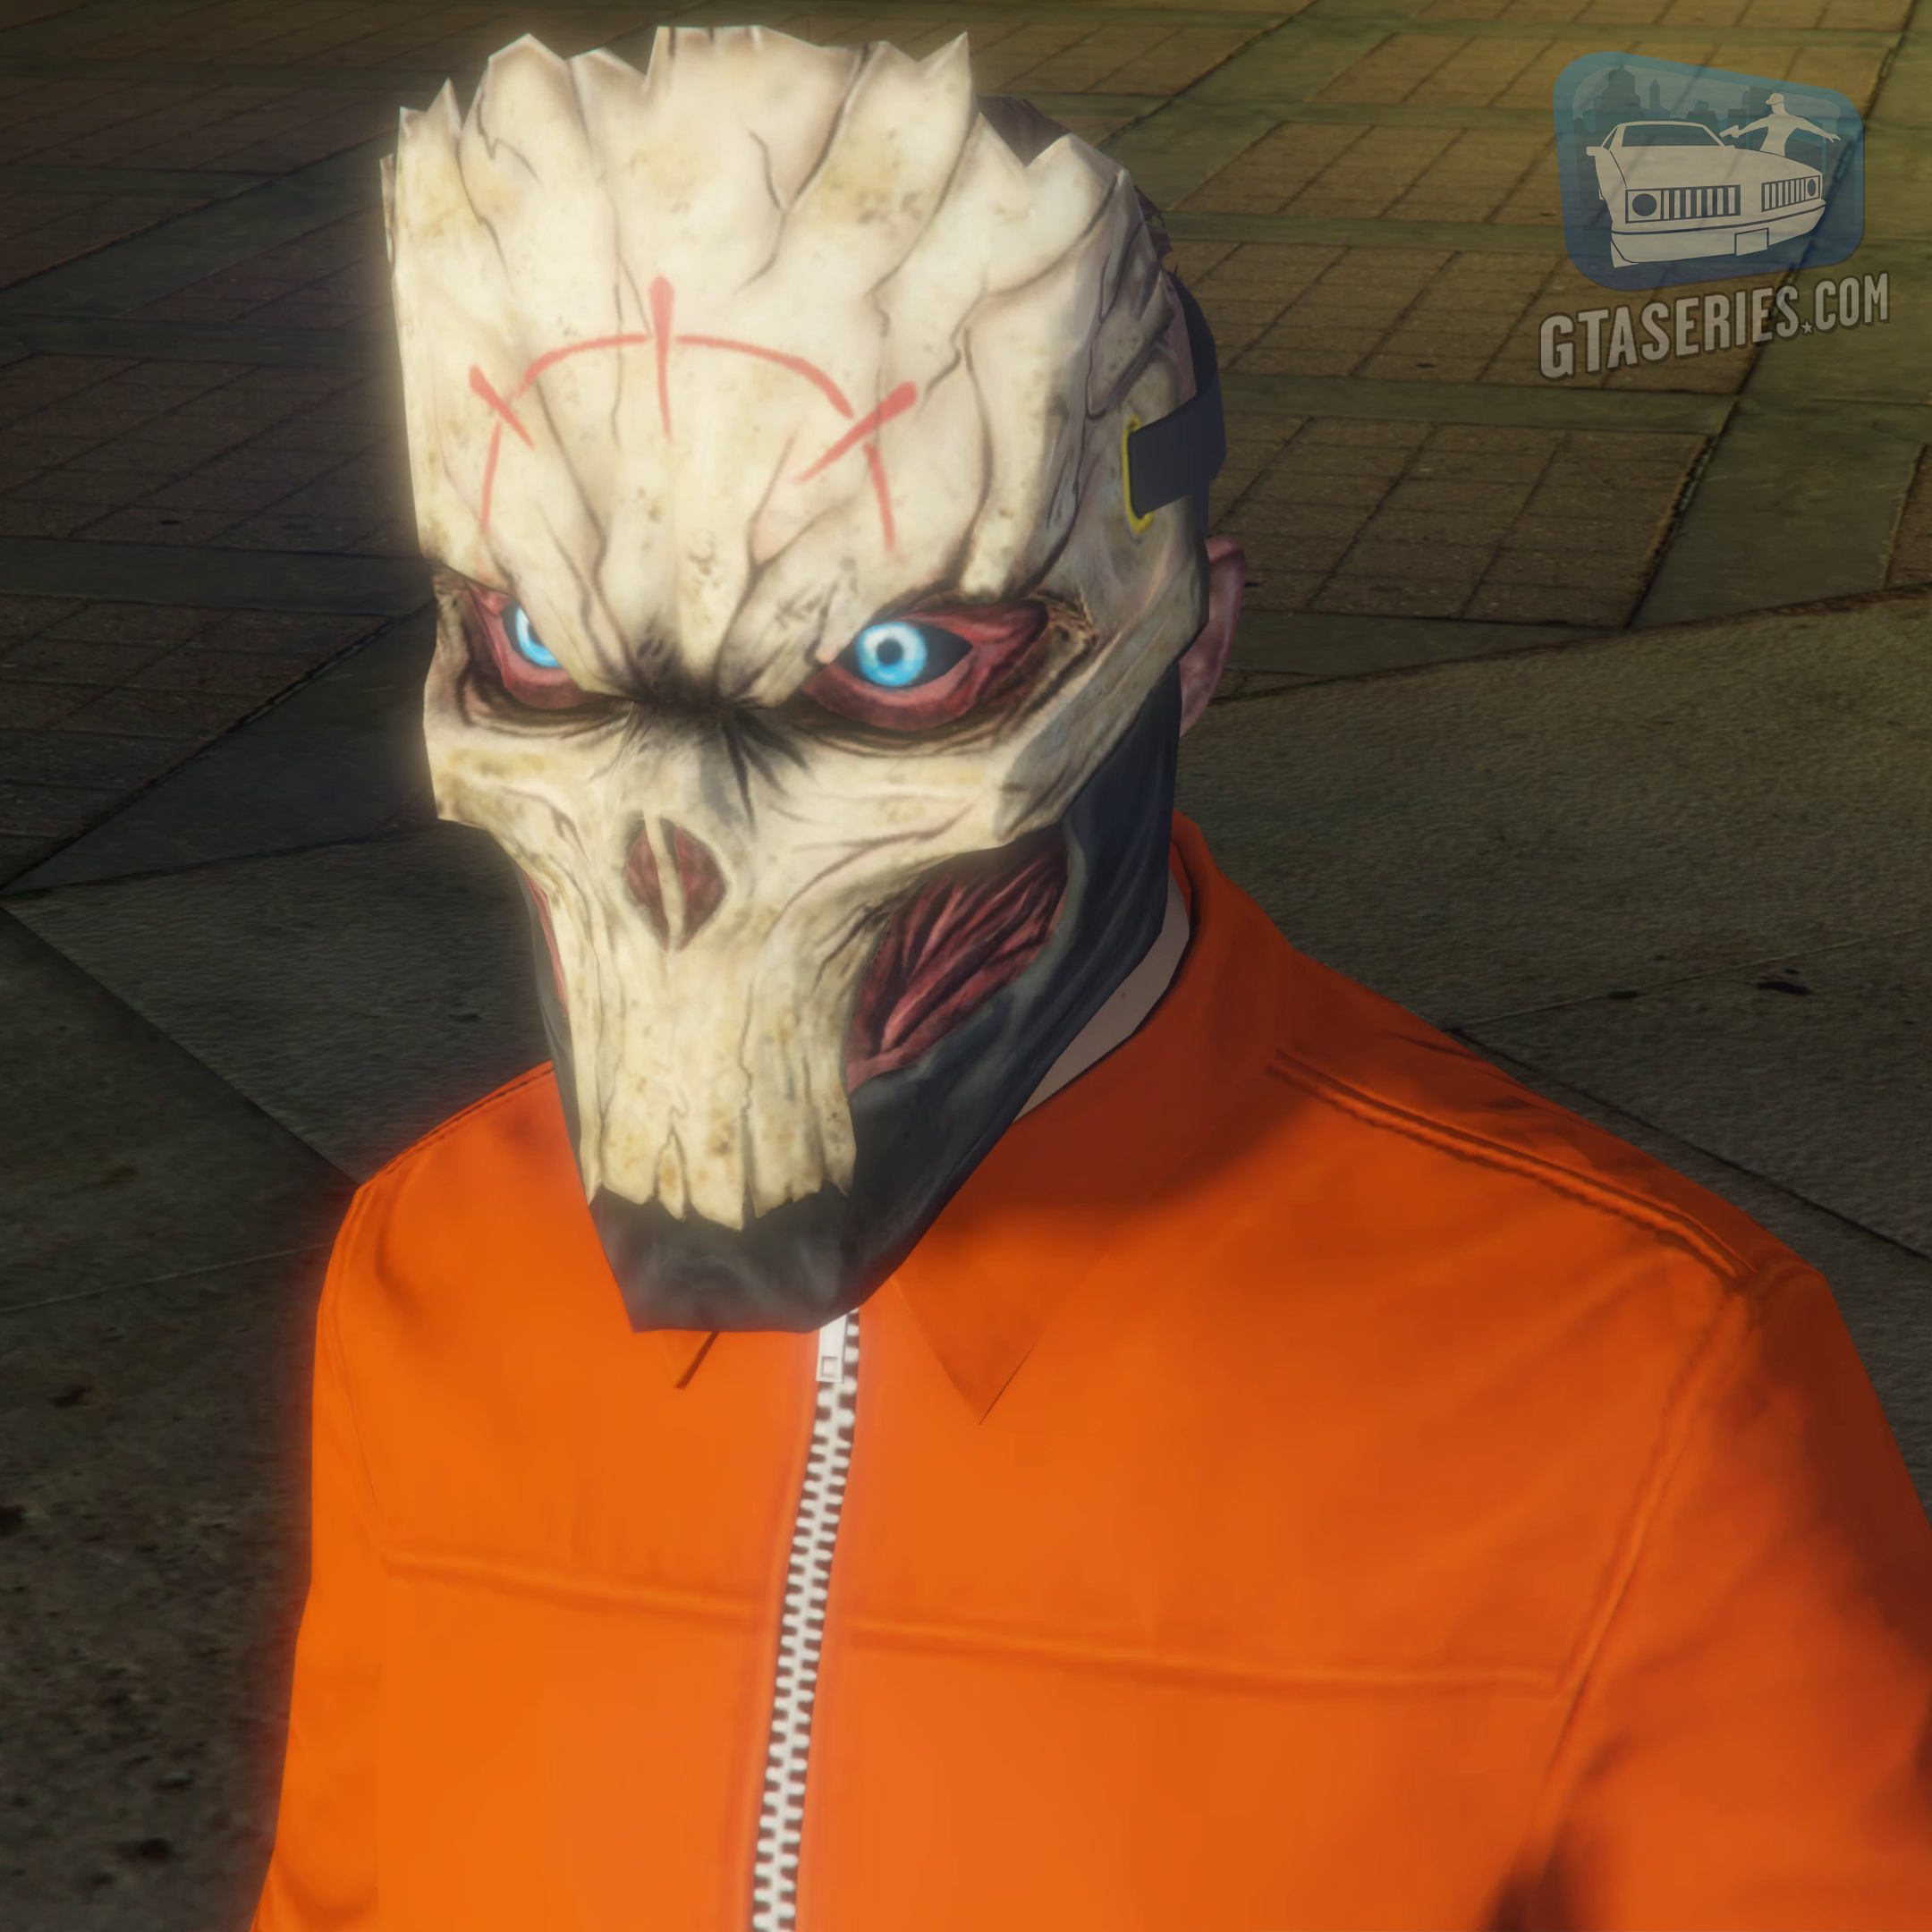 Hubert Hudson negeren maniac GTA Series Videos on Twitter: "Log in to #GTAOnline to unlock the "Death"  #Halloween Mask and complete a sell mission (any business) to receive the  "Halloween" chute bag. Collect "Event Cargo", during